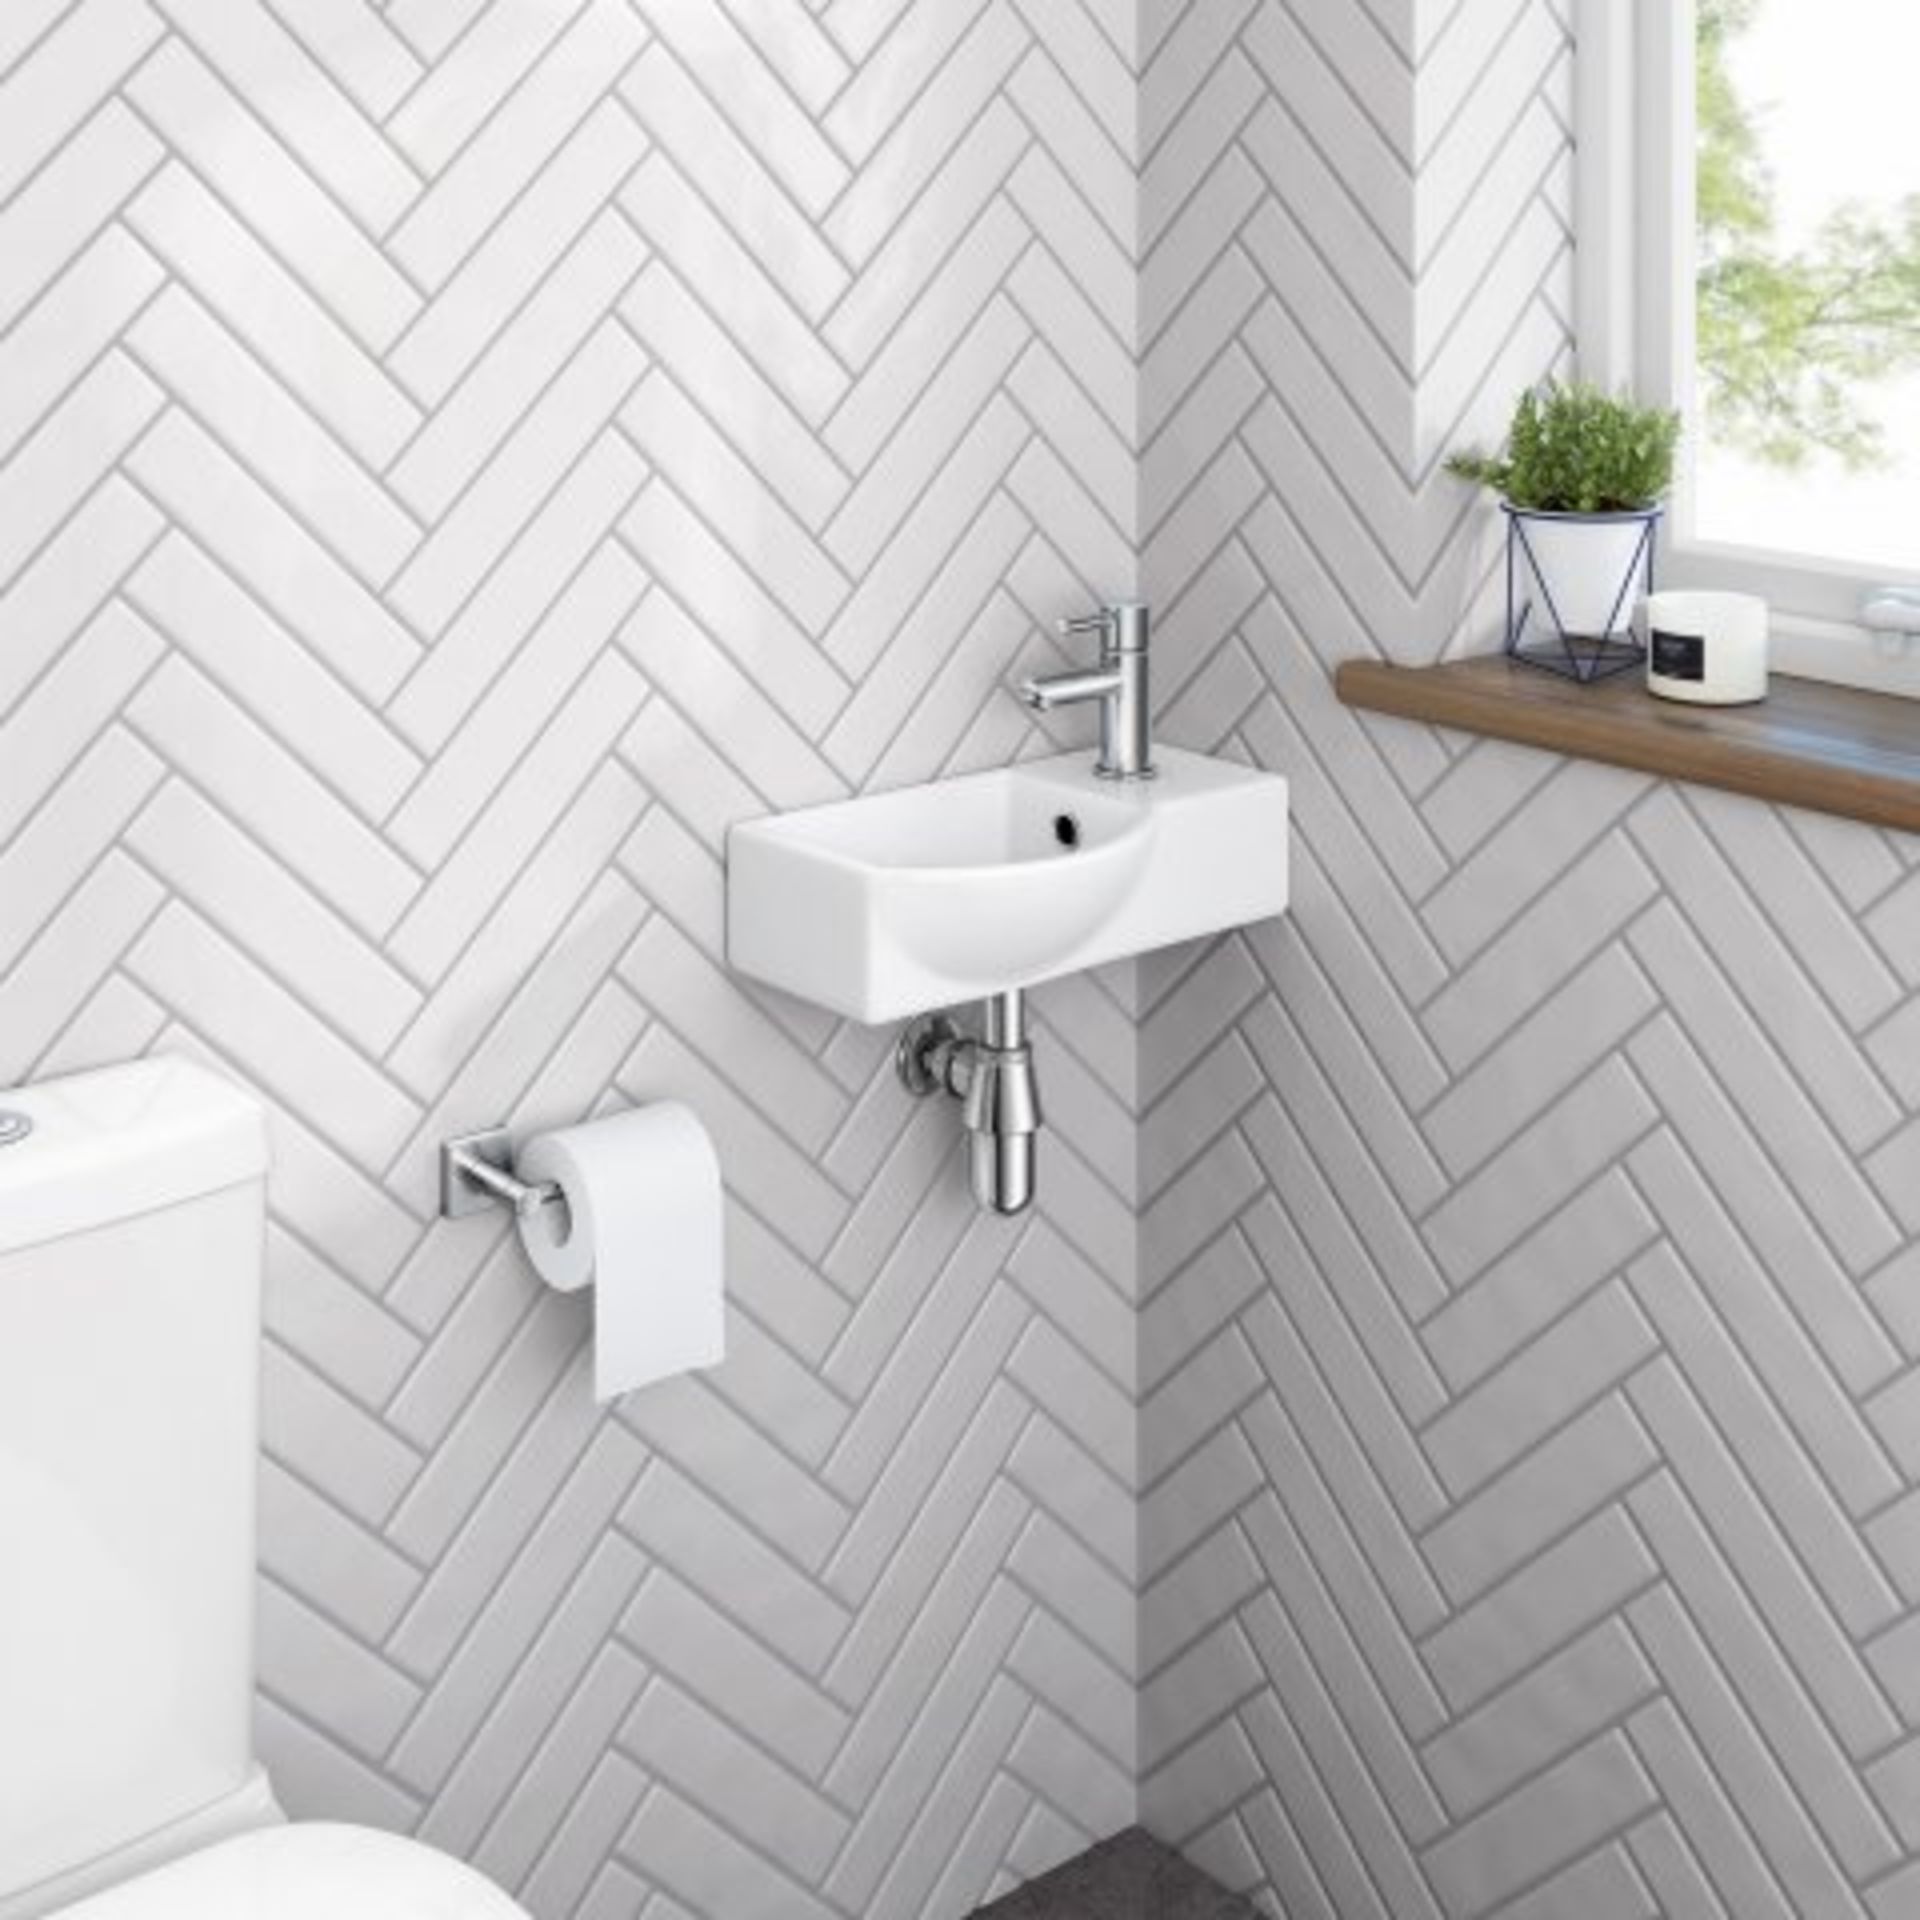 (O46) Isla Right Hand Wall Hung Cloakroom Basin - Small. RRP £87.99. If you want to save space in - Image 2 of 4